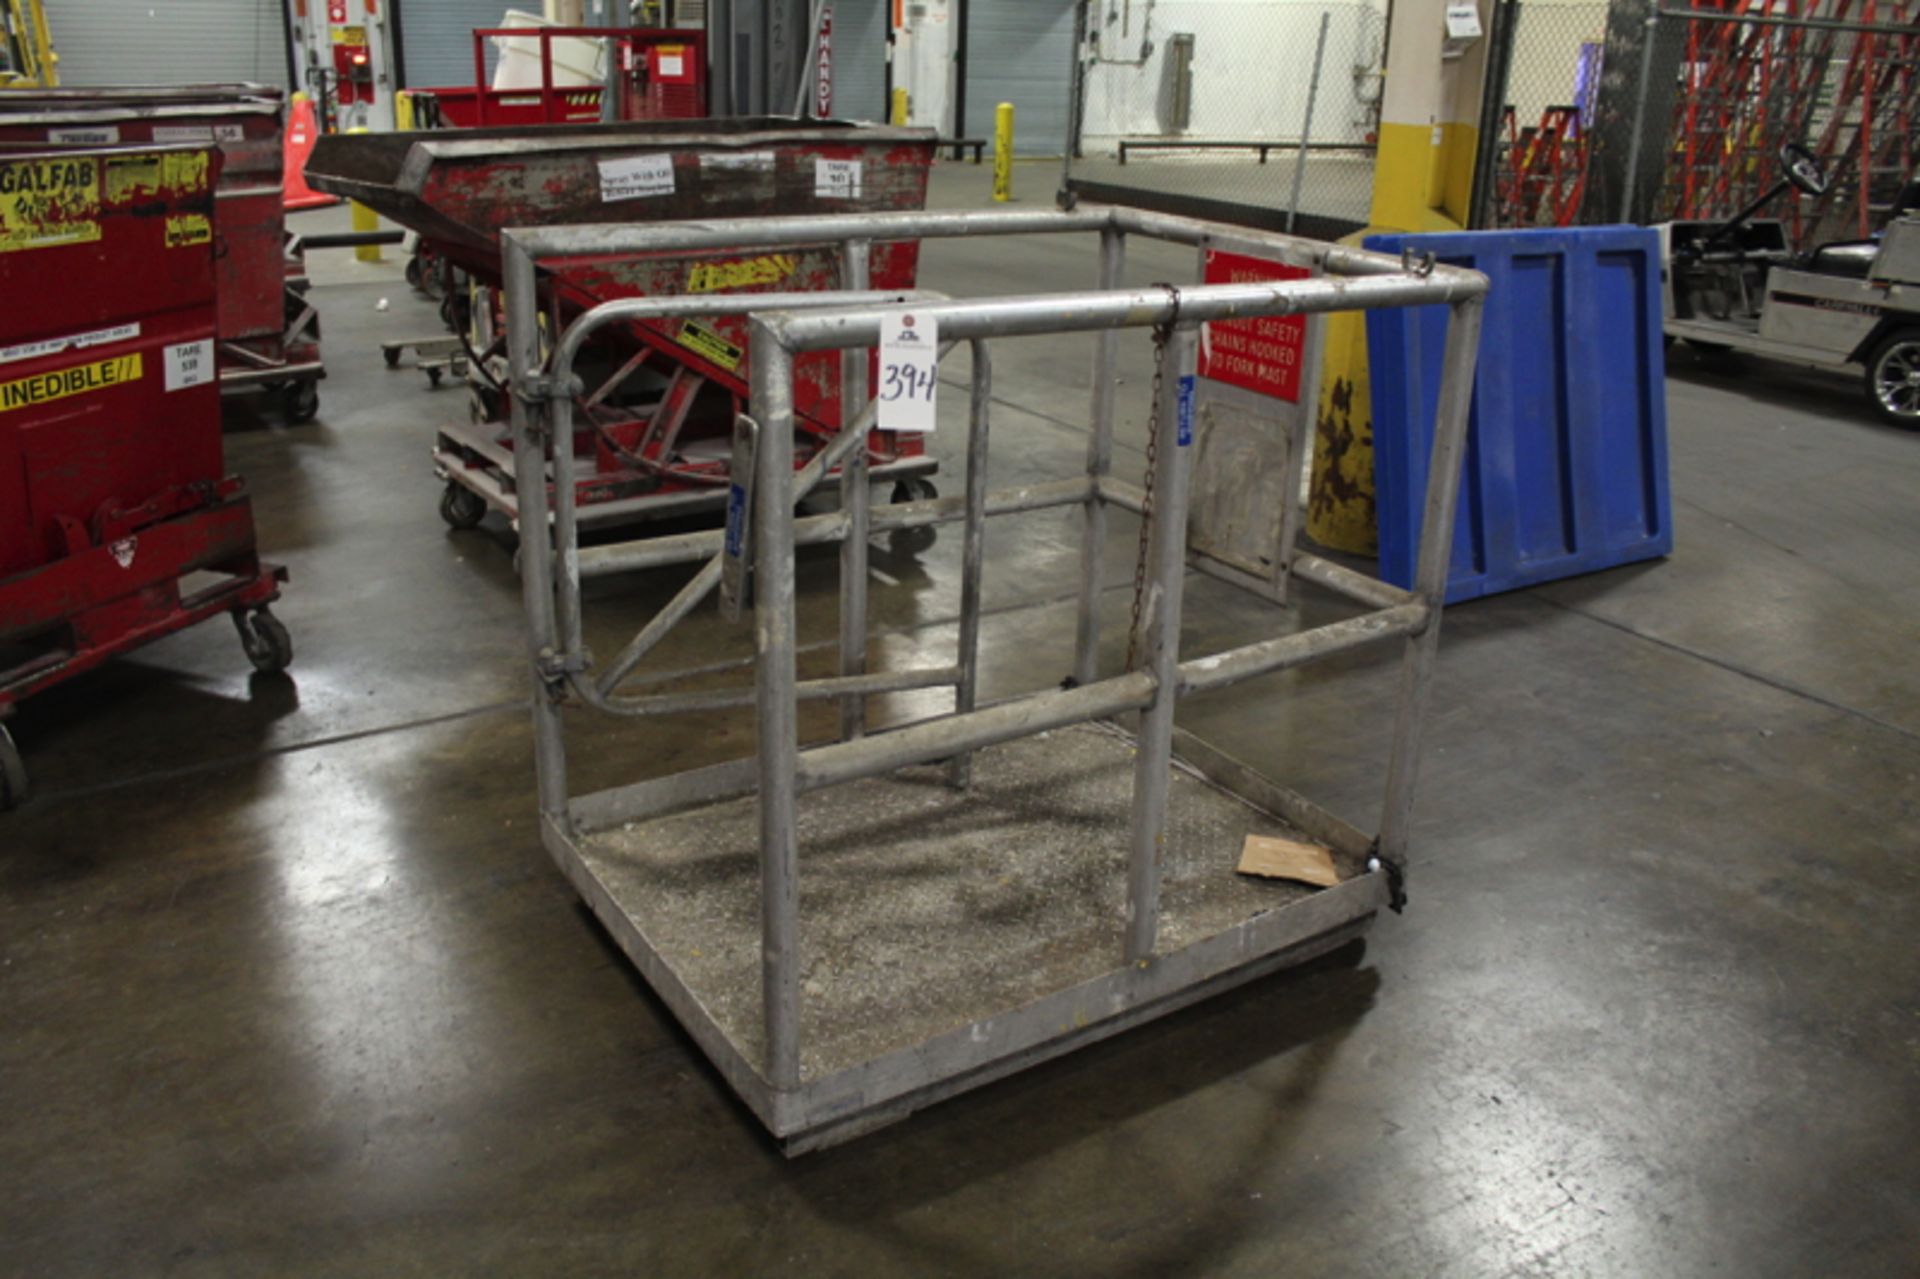 Aluminum Forklift Safety Basket | Location: Finished Product Warehouse | Rigging Price: $20